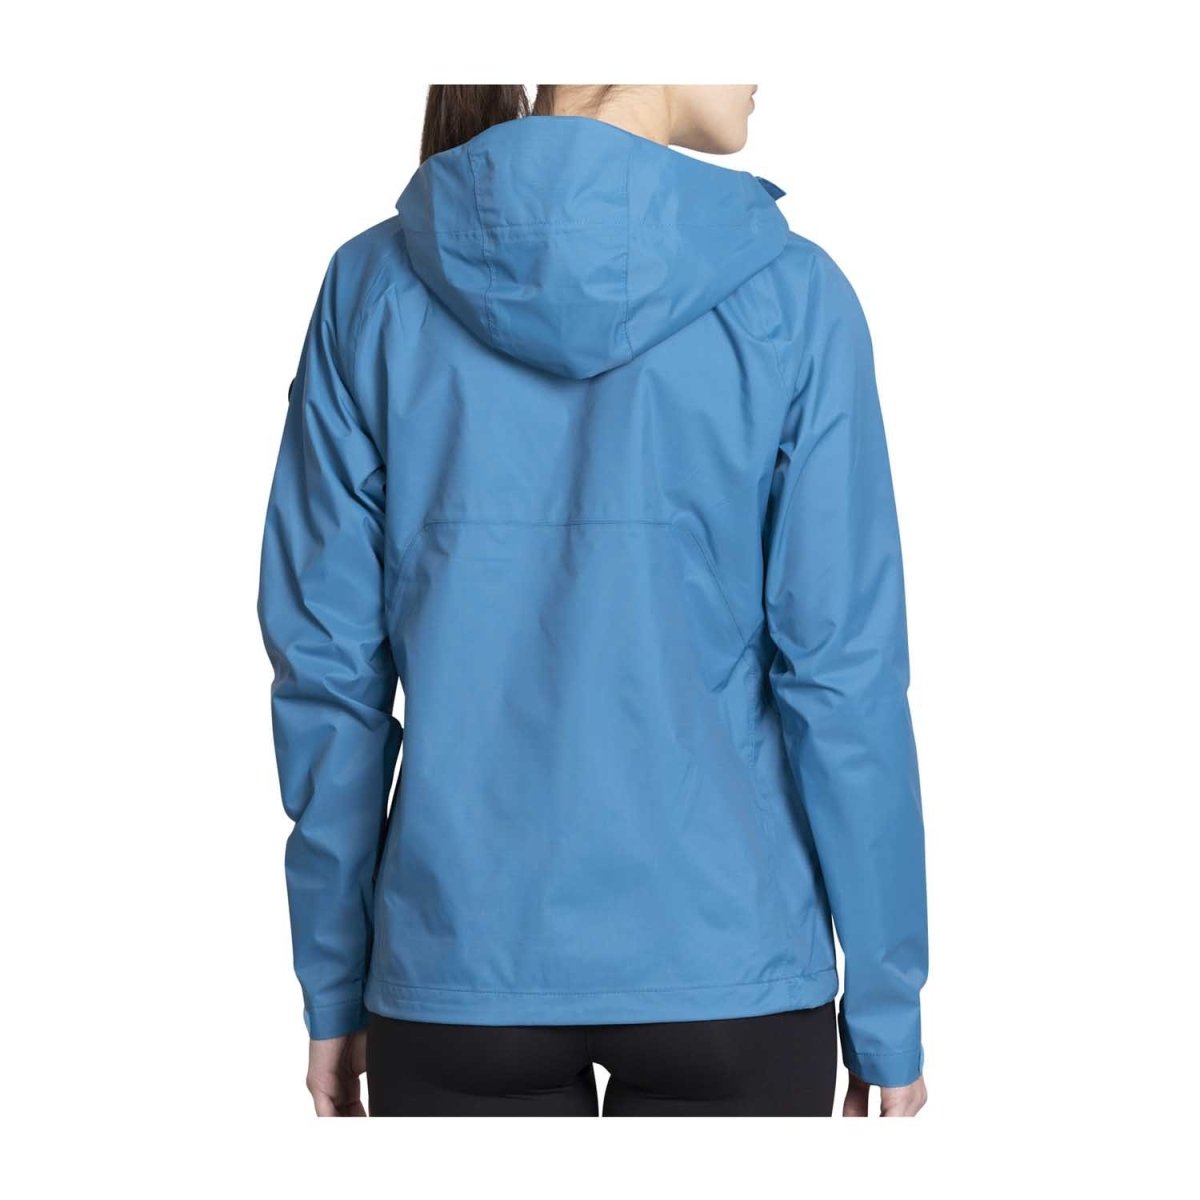 Outdoors with Pokémon Apollo Blue Rain Jacket by Outdoor Research ...